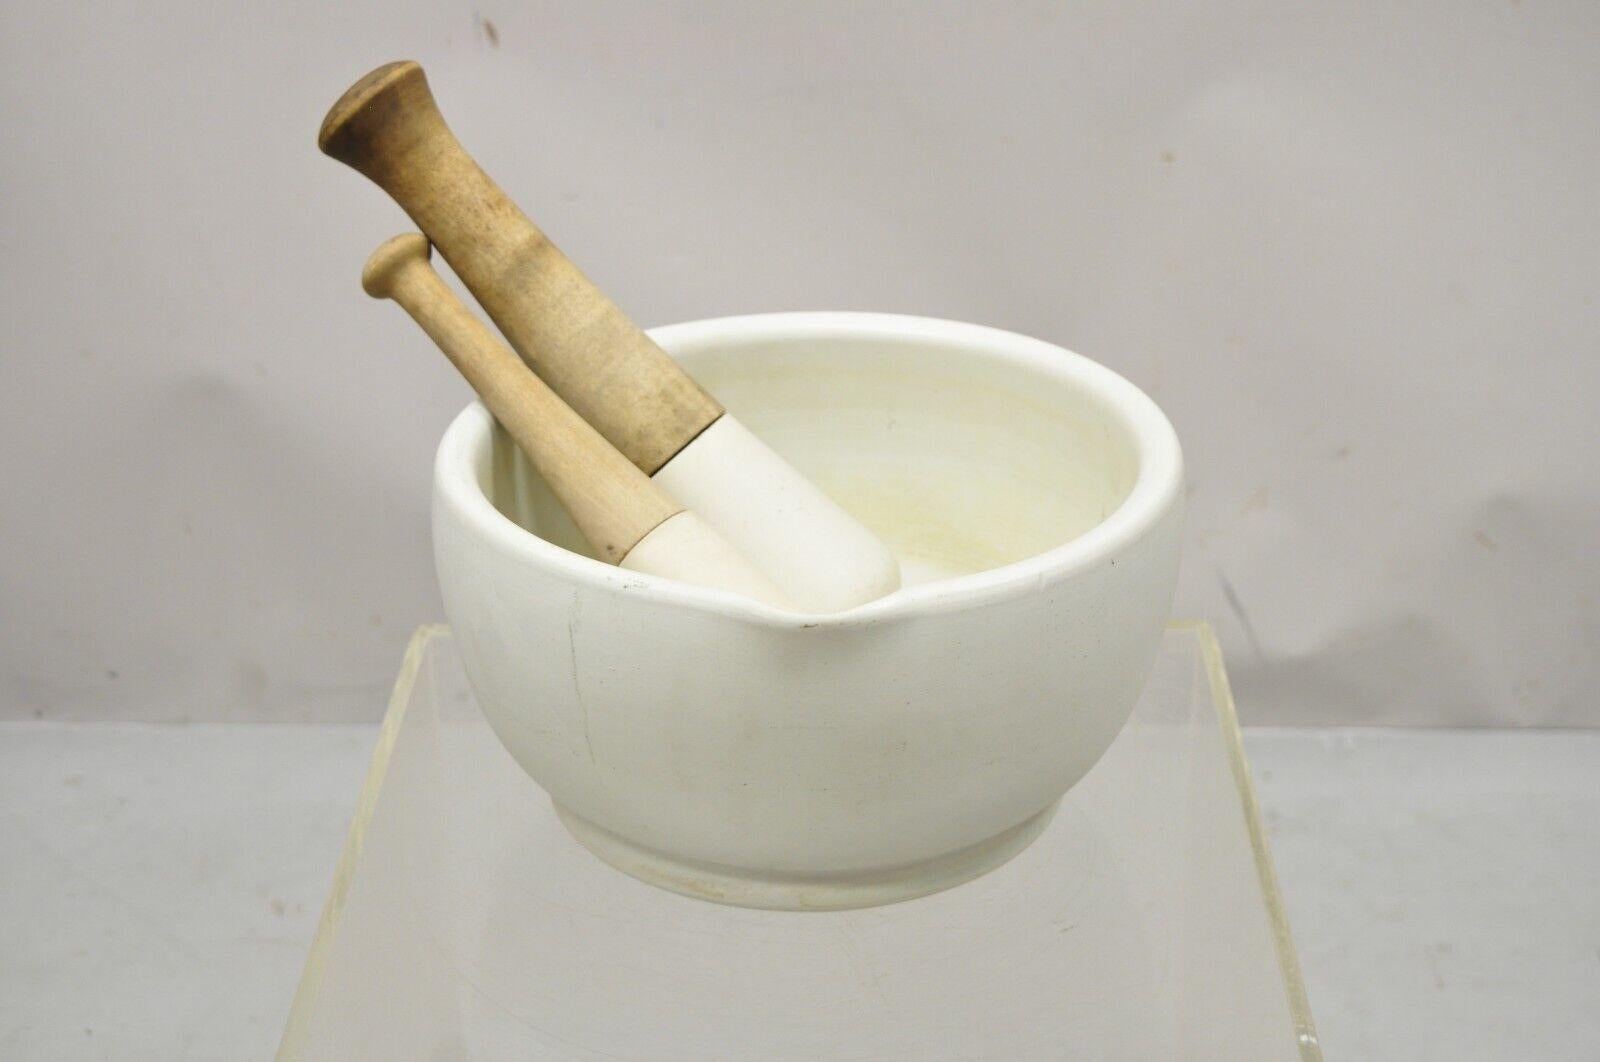 Antique granite marble & wood mortar & pestle bowlApothecary attributed to Thomas Maddock & Sons. Item features solid marble/granite bowl, (2) sizes of pestle with solid wood handles, bowl with carved spout, very nice antique set, quality